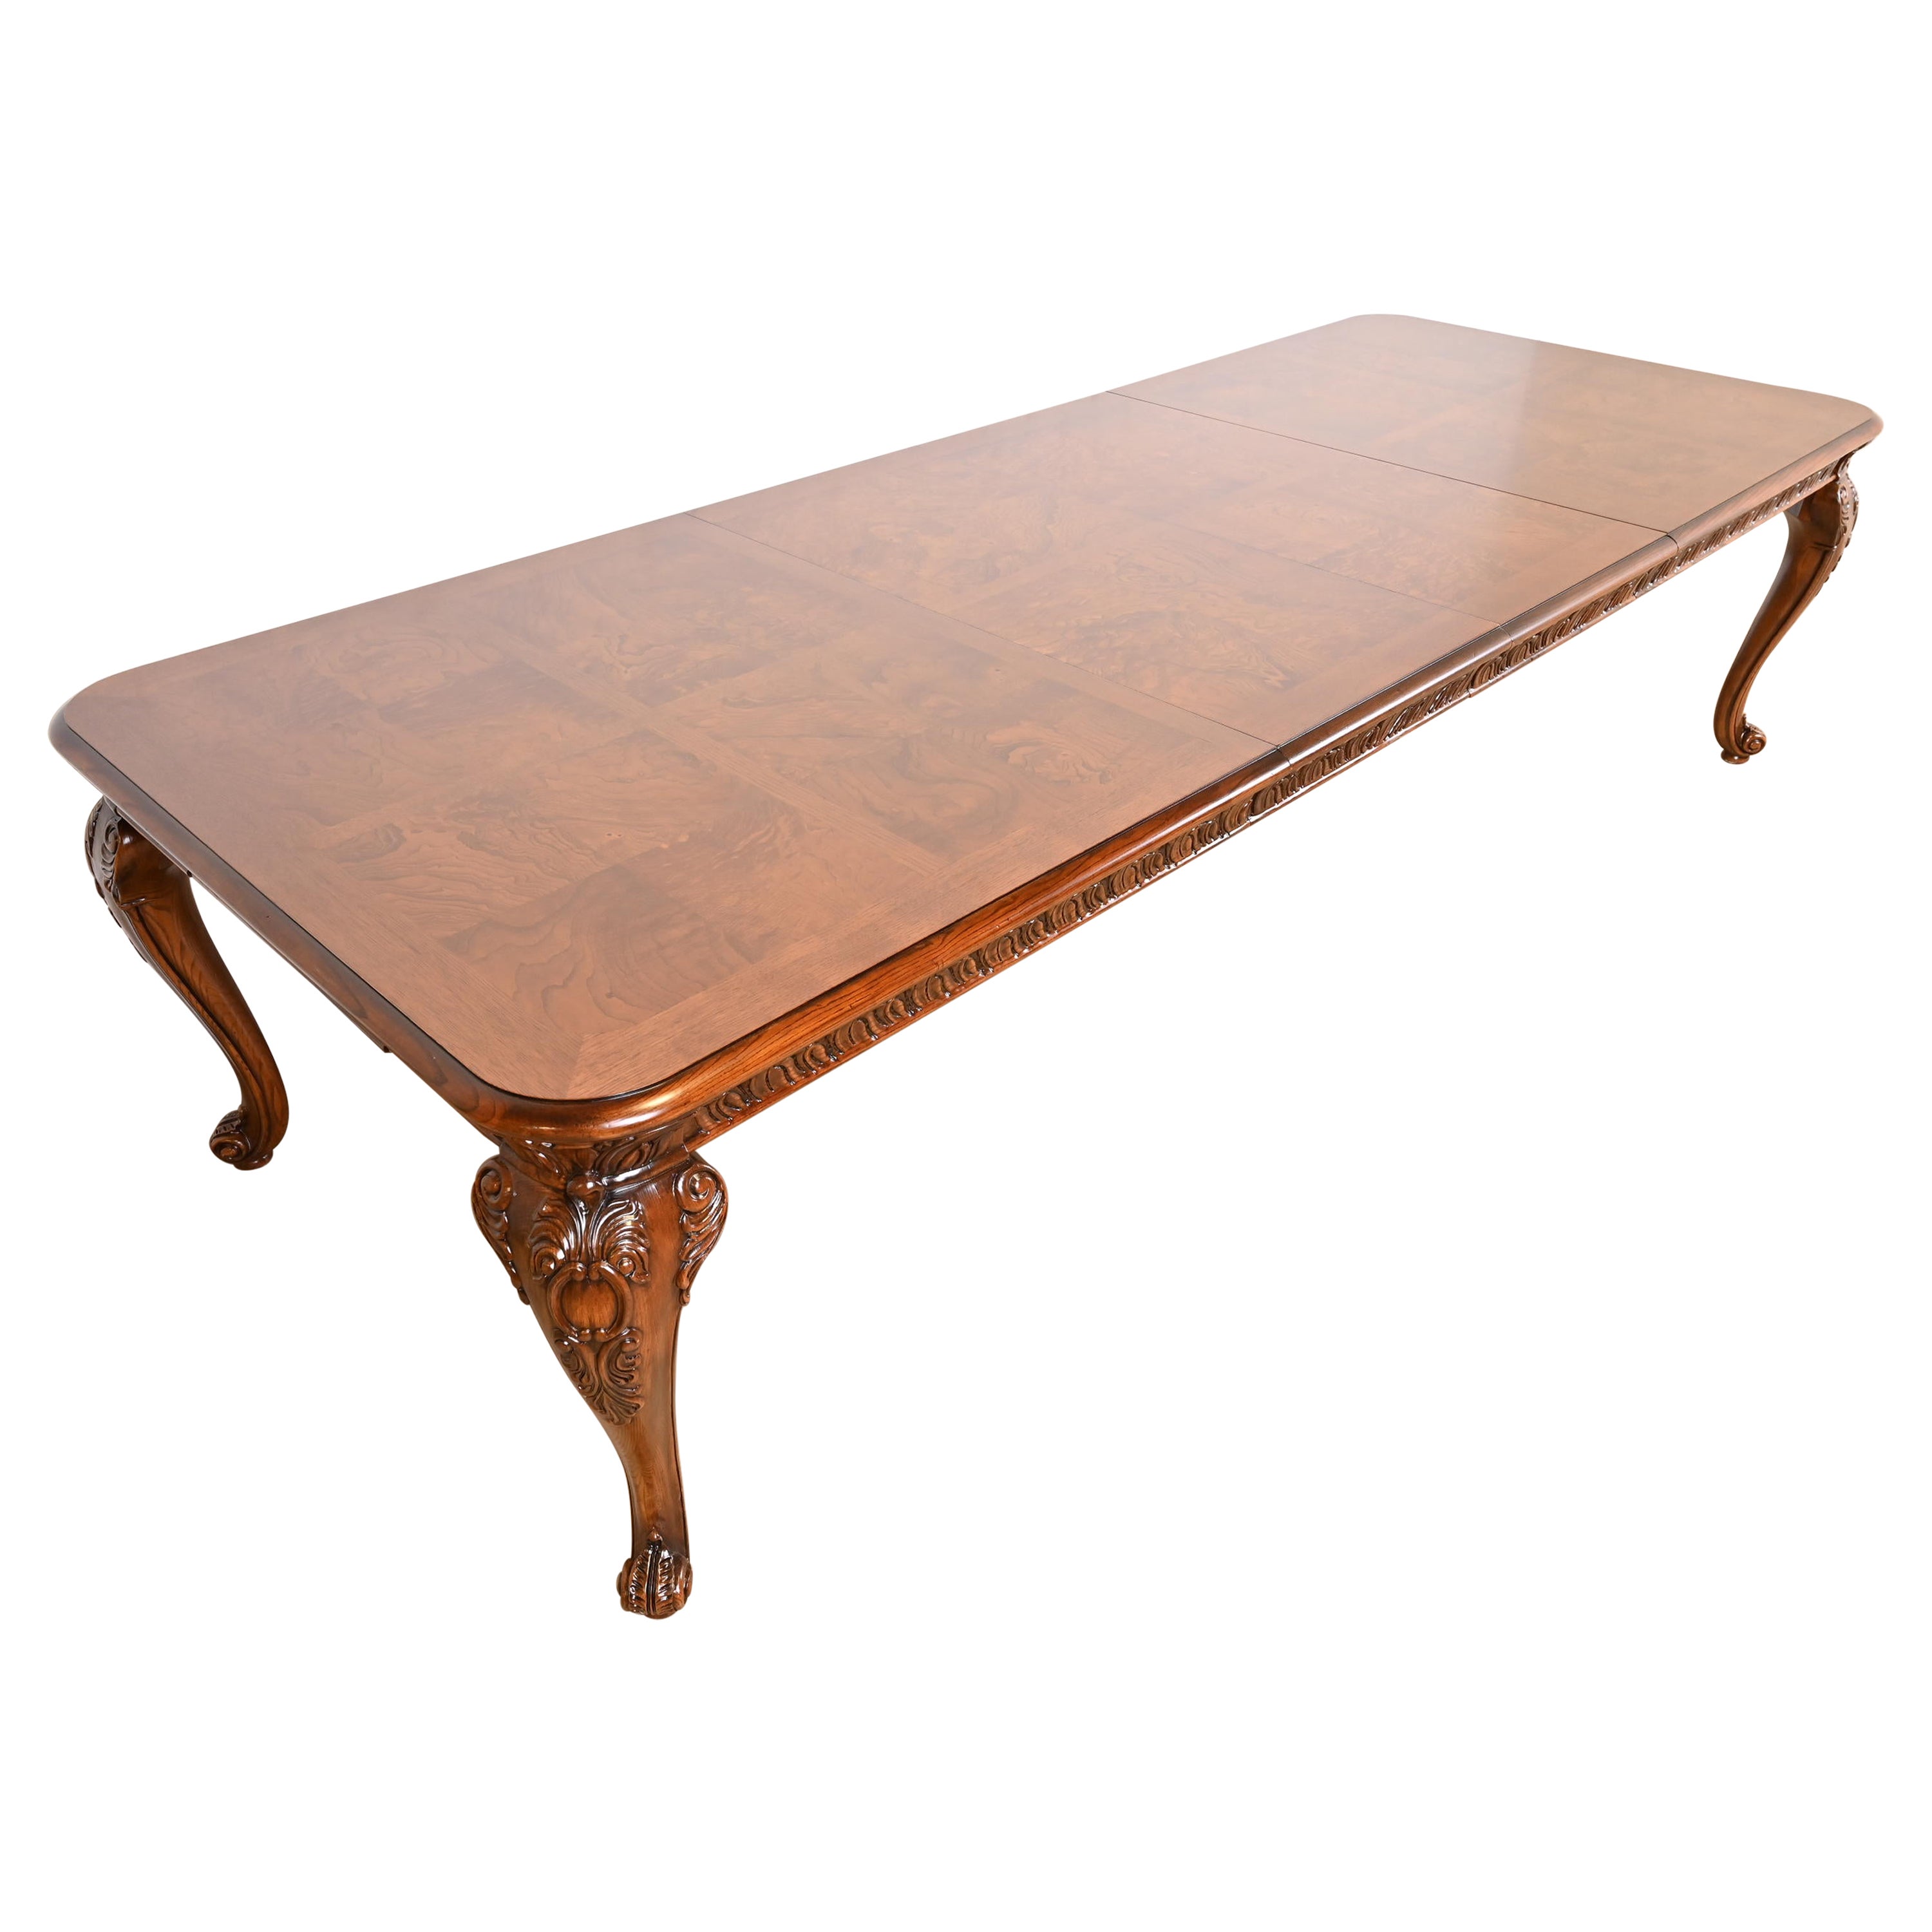 Henredon Italian Baroque Carved Oak and Burl Wood Dining Table, Newly Refinished For Sale